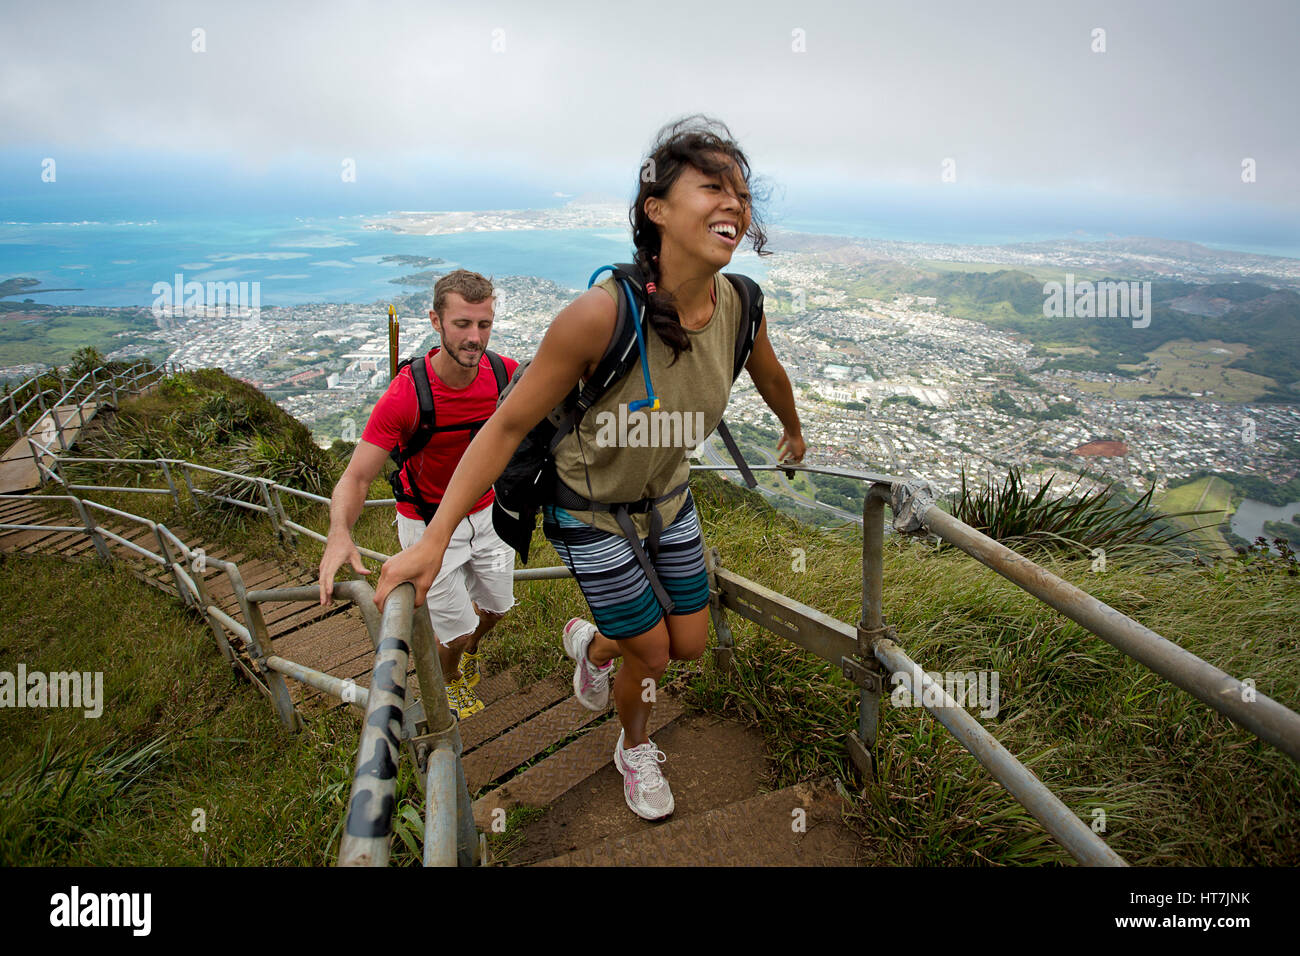 A Extreme Hiker Chase Norton Guiding A Friend On The Haiku Stairs In Oahu, Hawaii Island Stock Photo